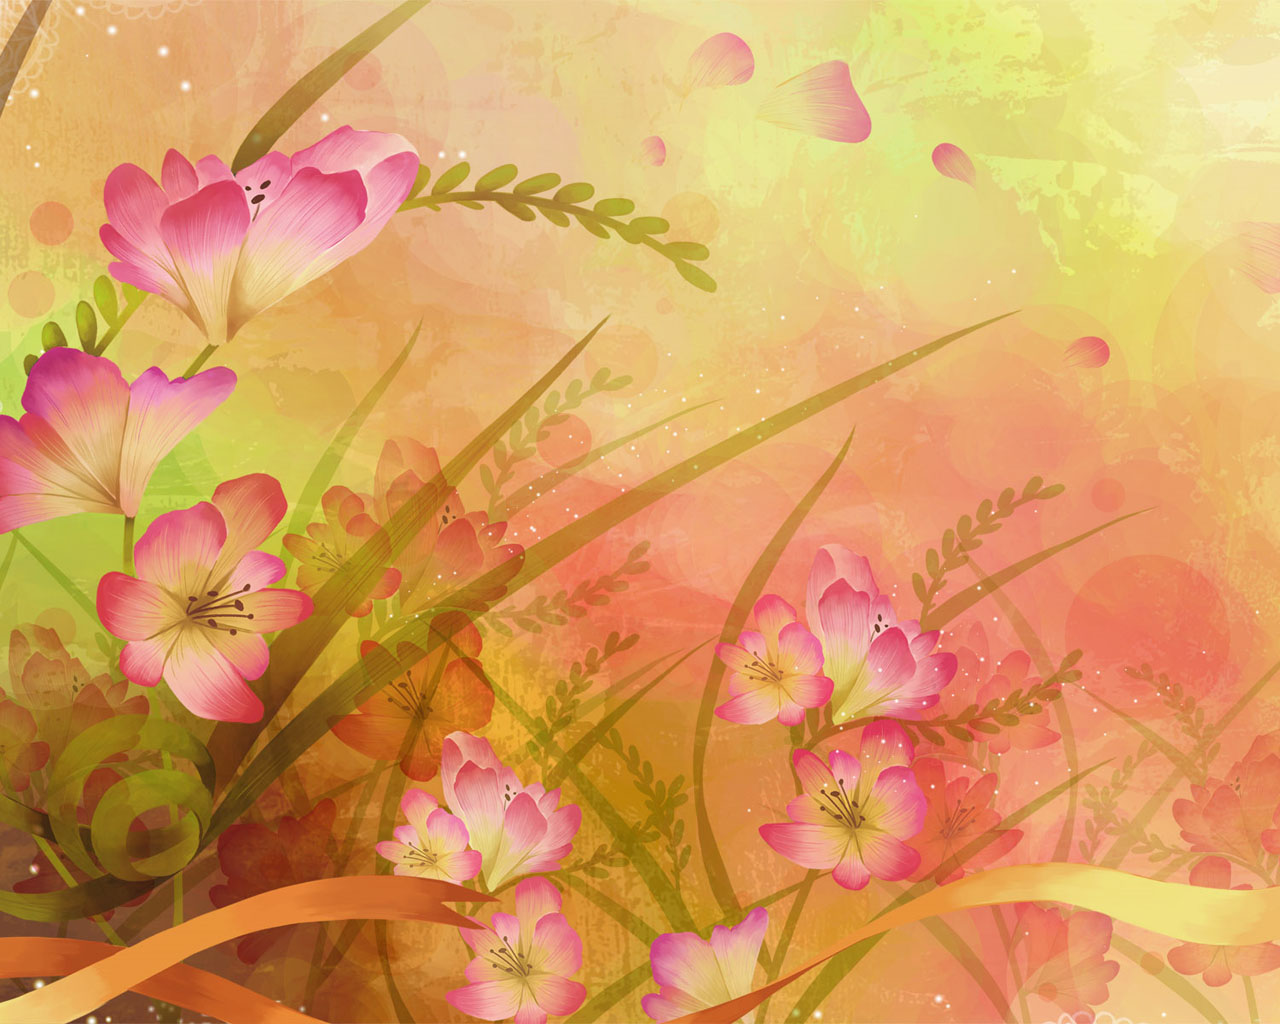 New Floral Wallpapers Feb 9 2011   Screensavers and Backgrounds 1280x1024